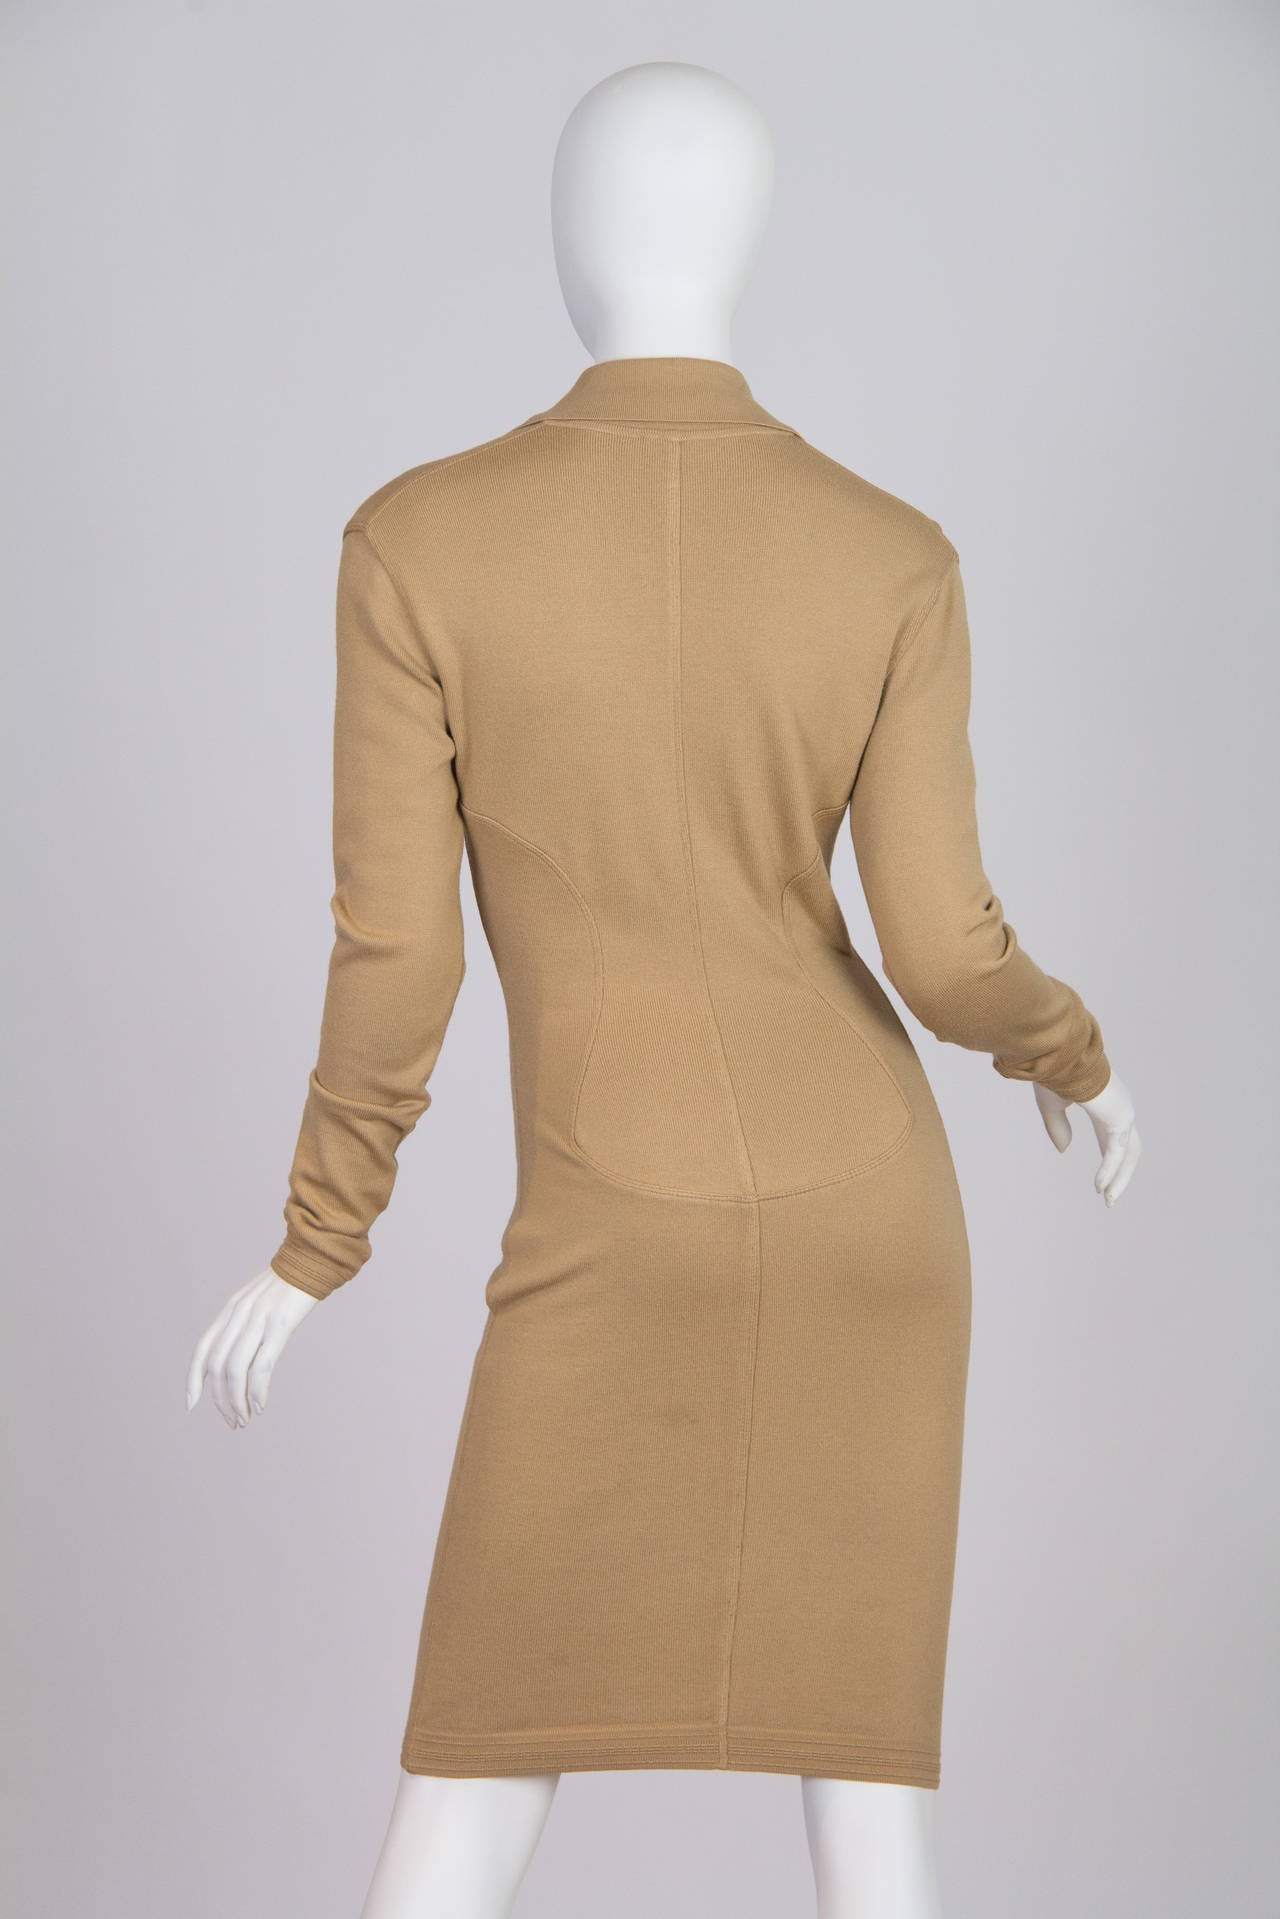 Alaia Dress For Sale at 1stdibs